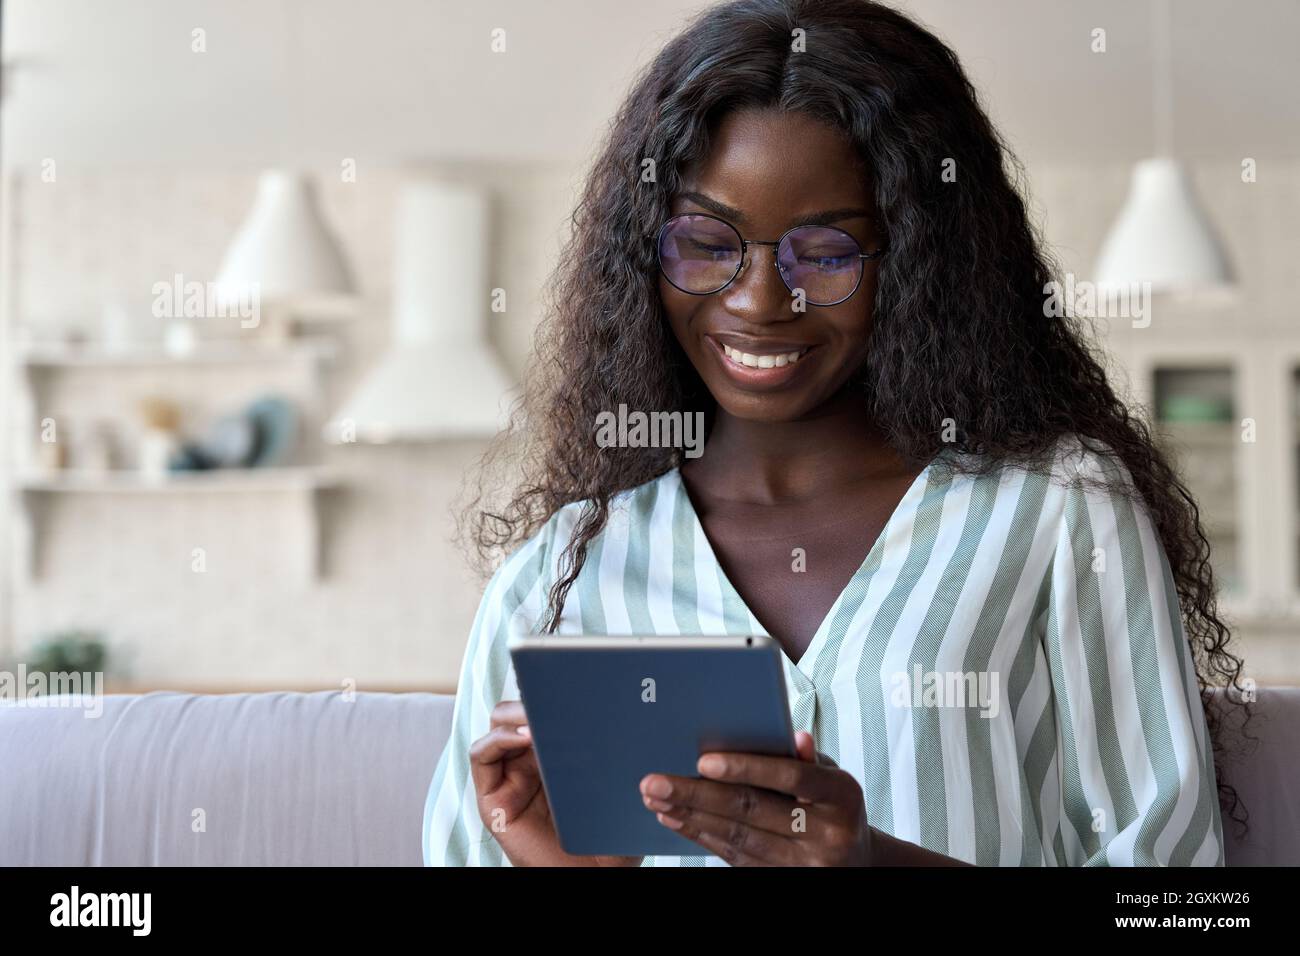 Smiling happy black girl in glasses sits on sofa at home holding tablet device. Stock Photo